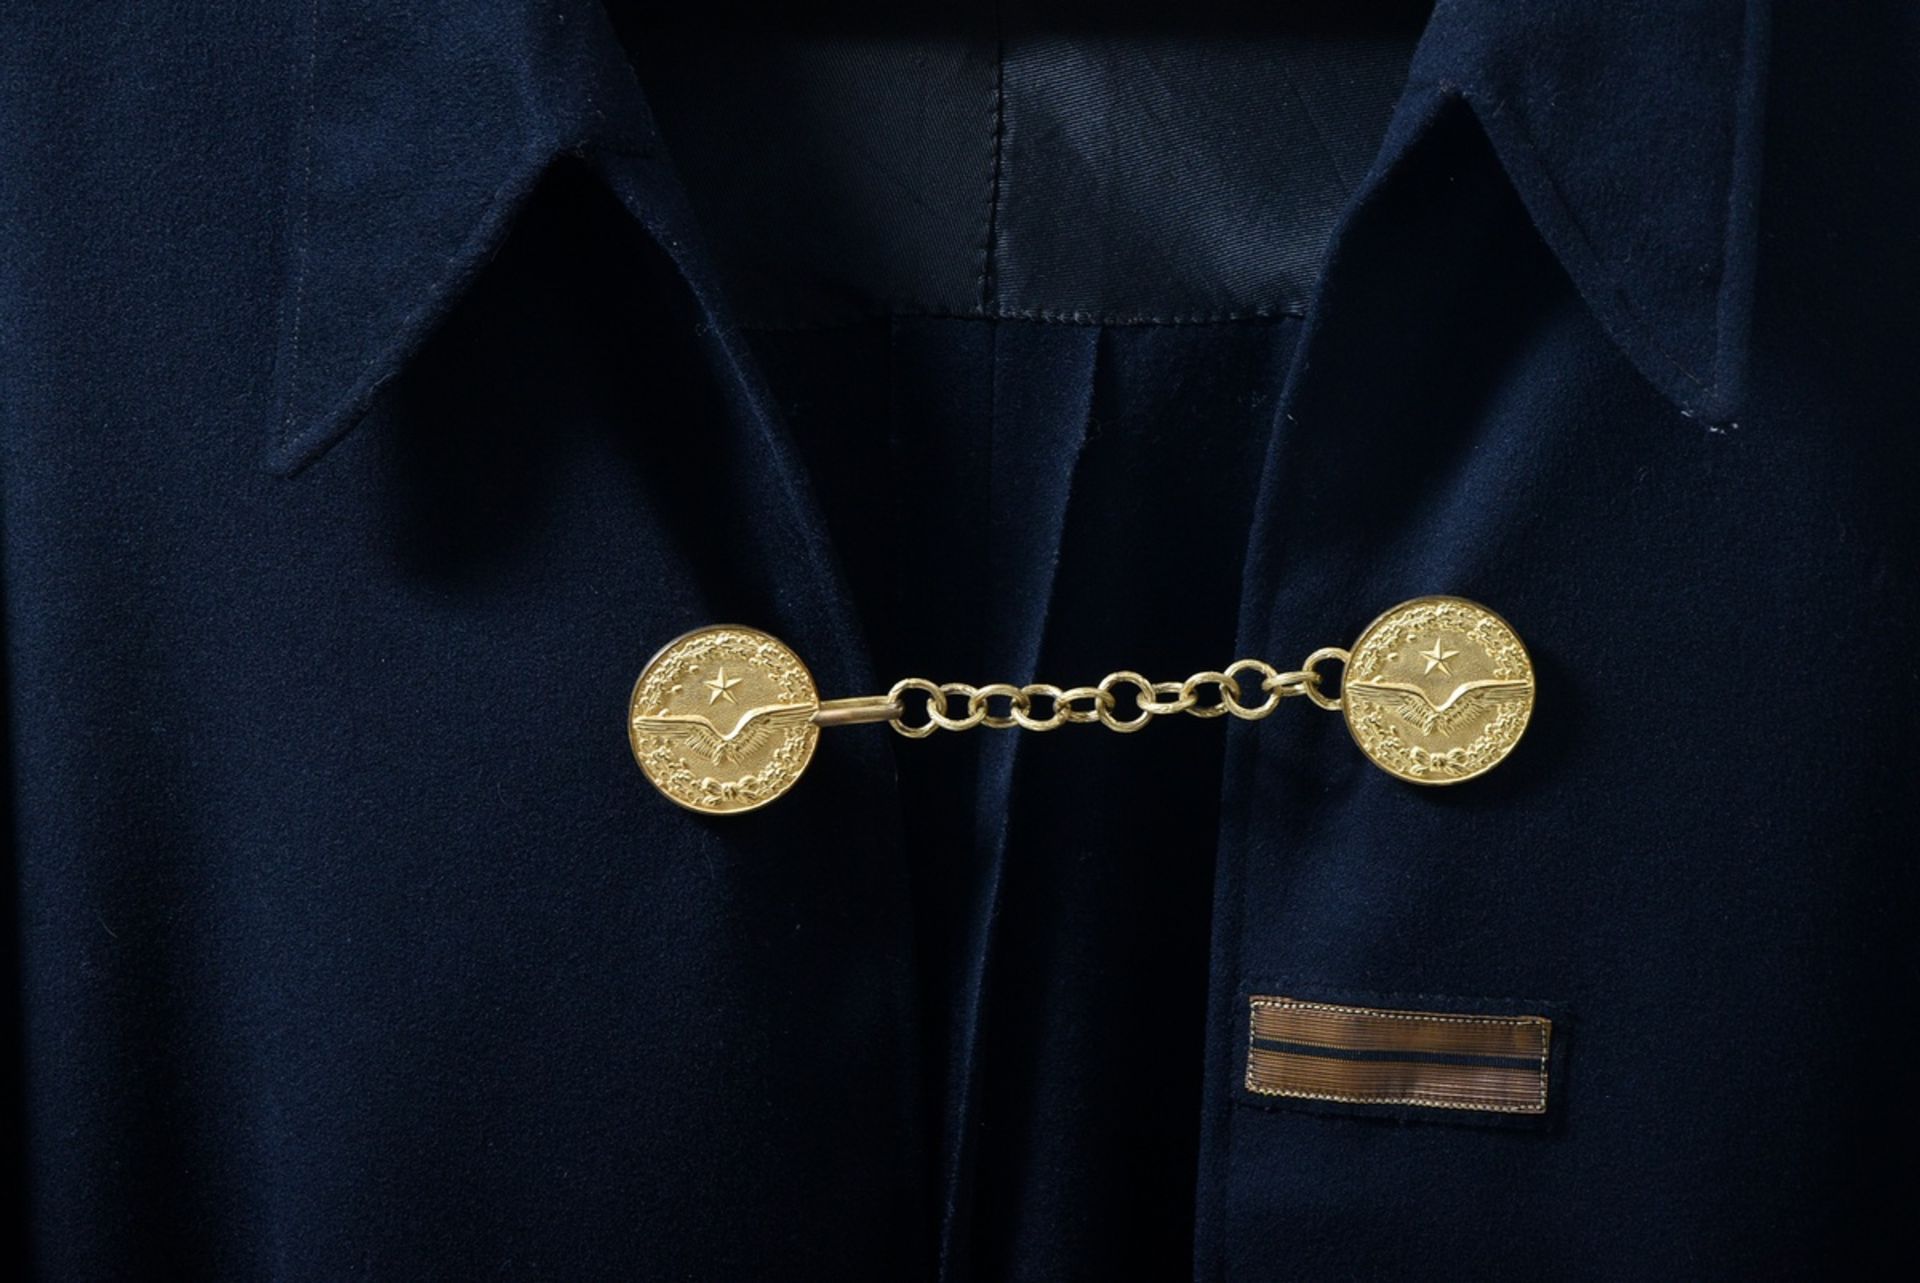 French aviator cape with brass clasp and chain, dark blue wool - Image 2 of 3